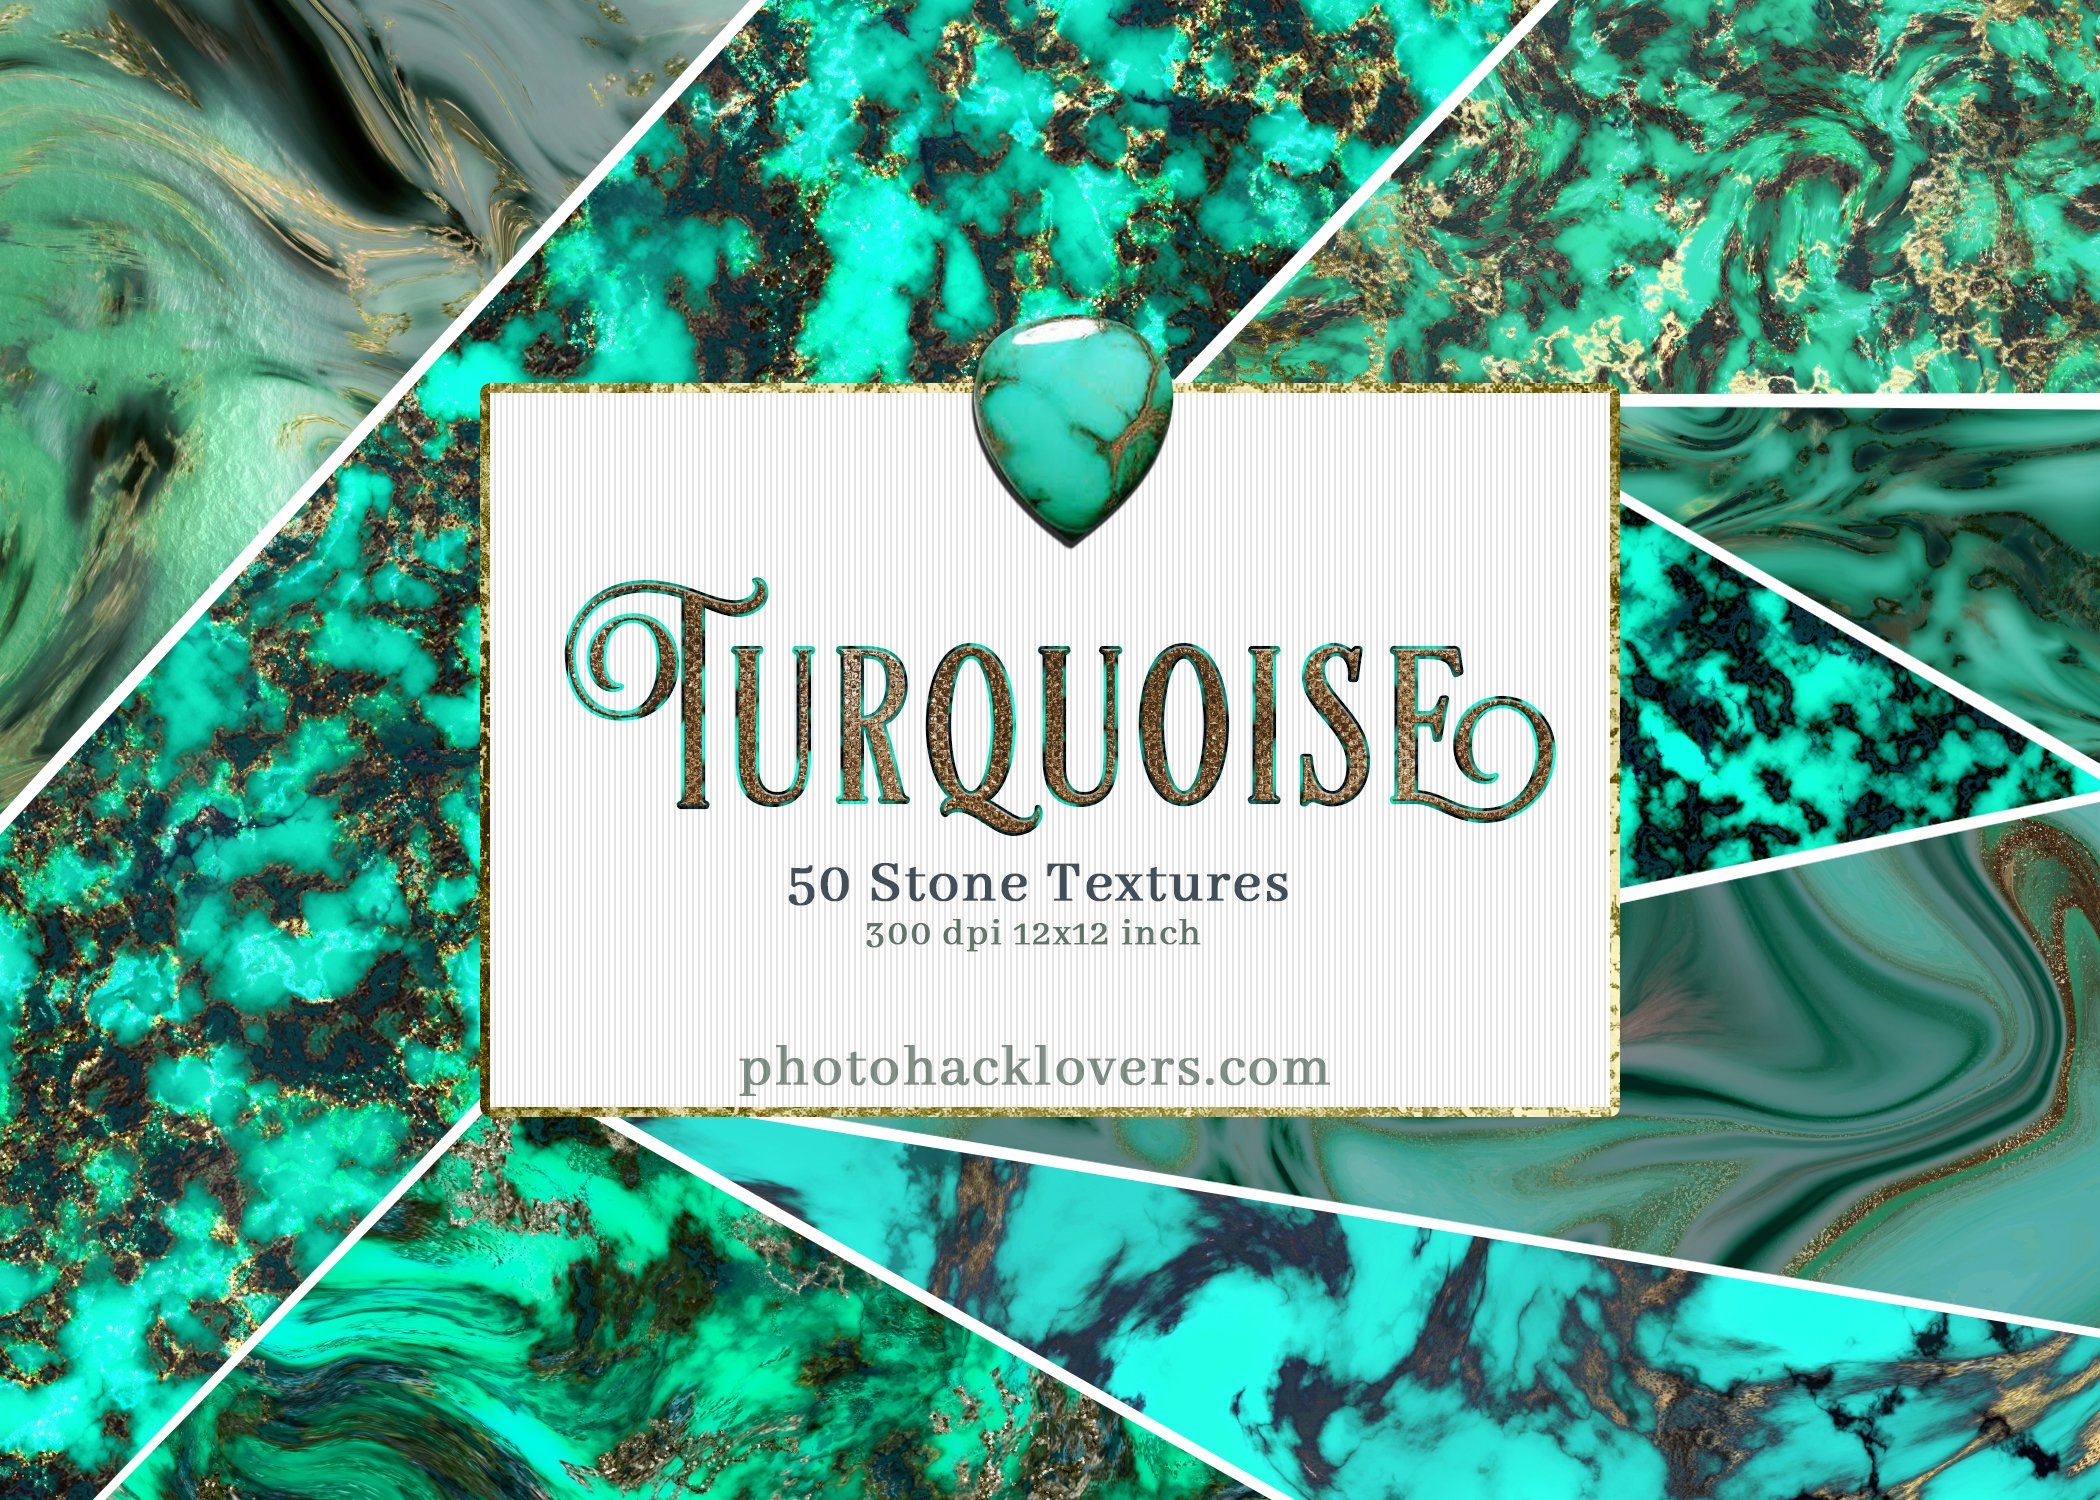 50 Turquoise  Textures cover image.